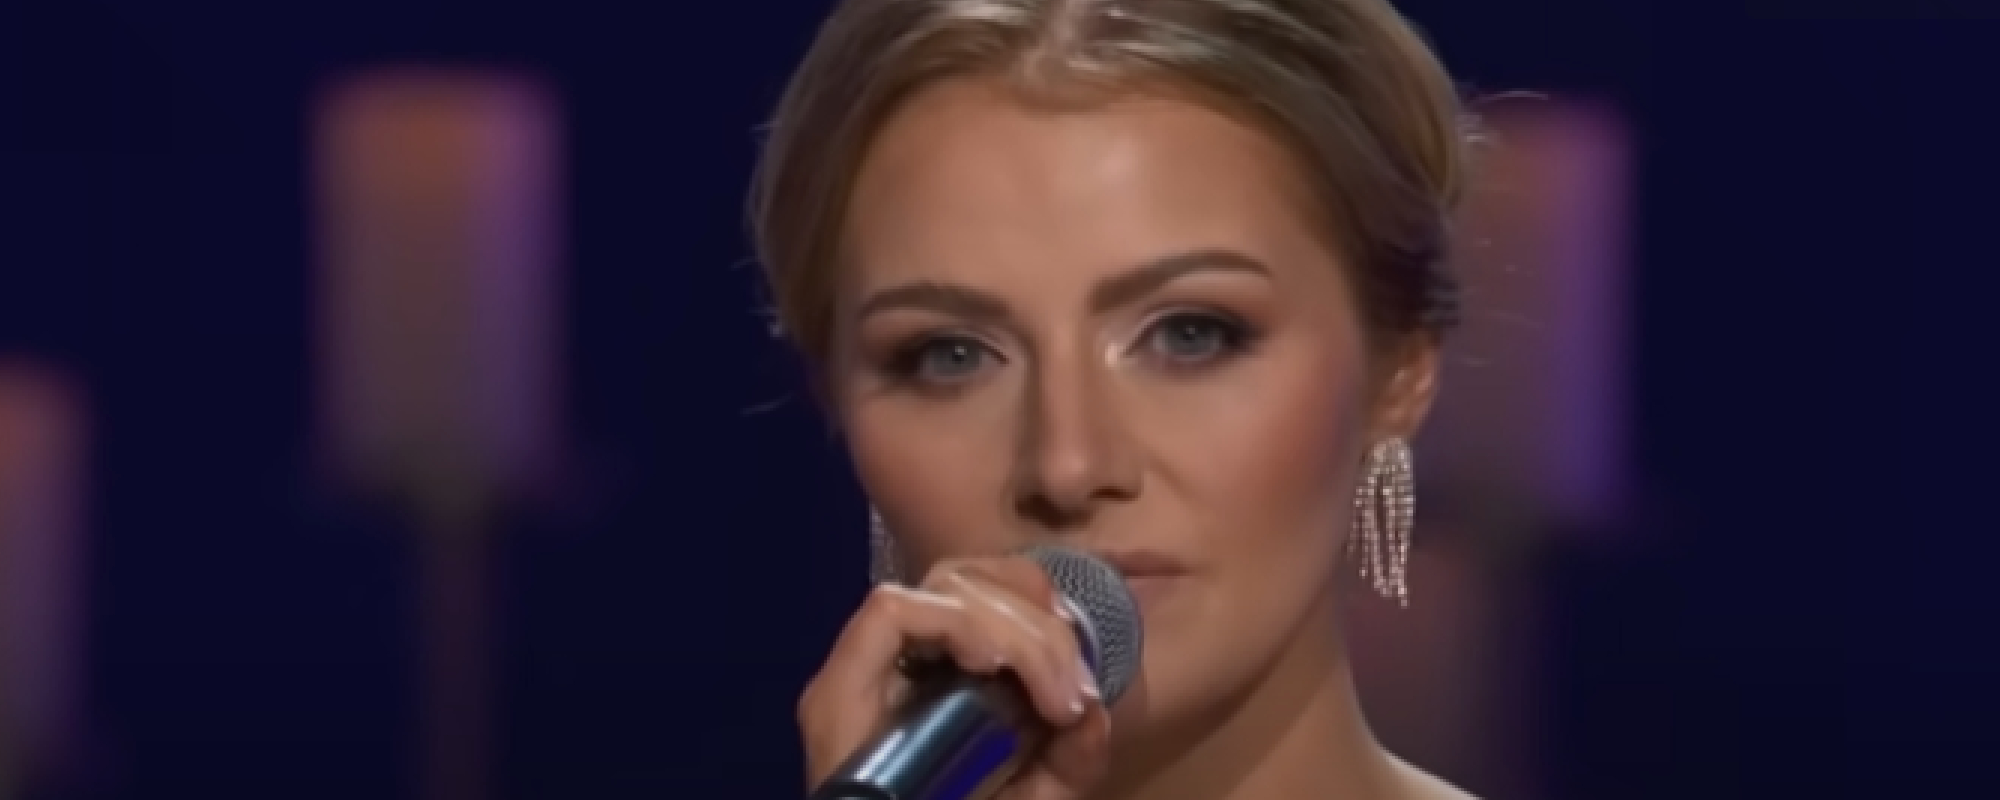 Emmy Russell Looks To Become the Next ‘American Idol’ but Needs Your Help—Here’s How to Vote